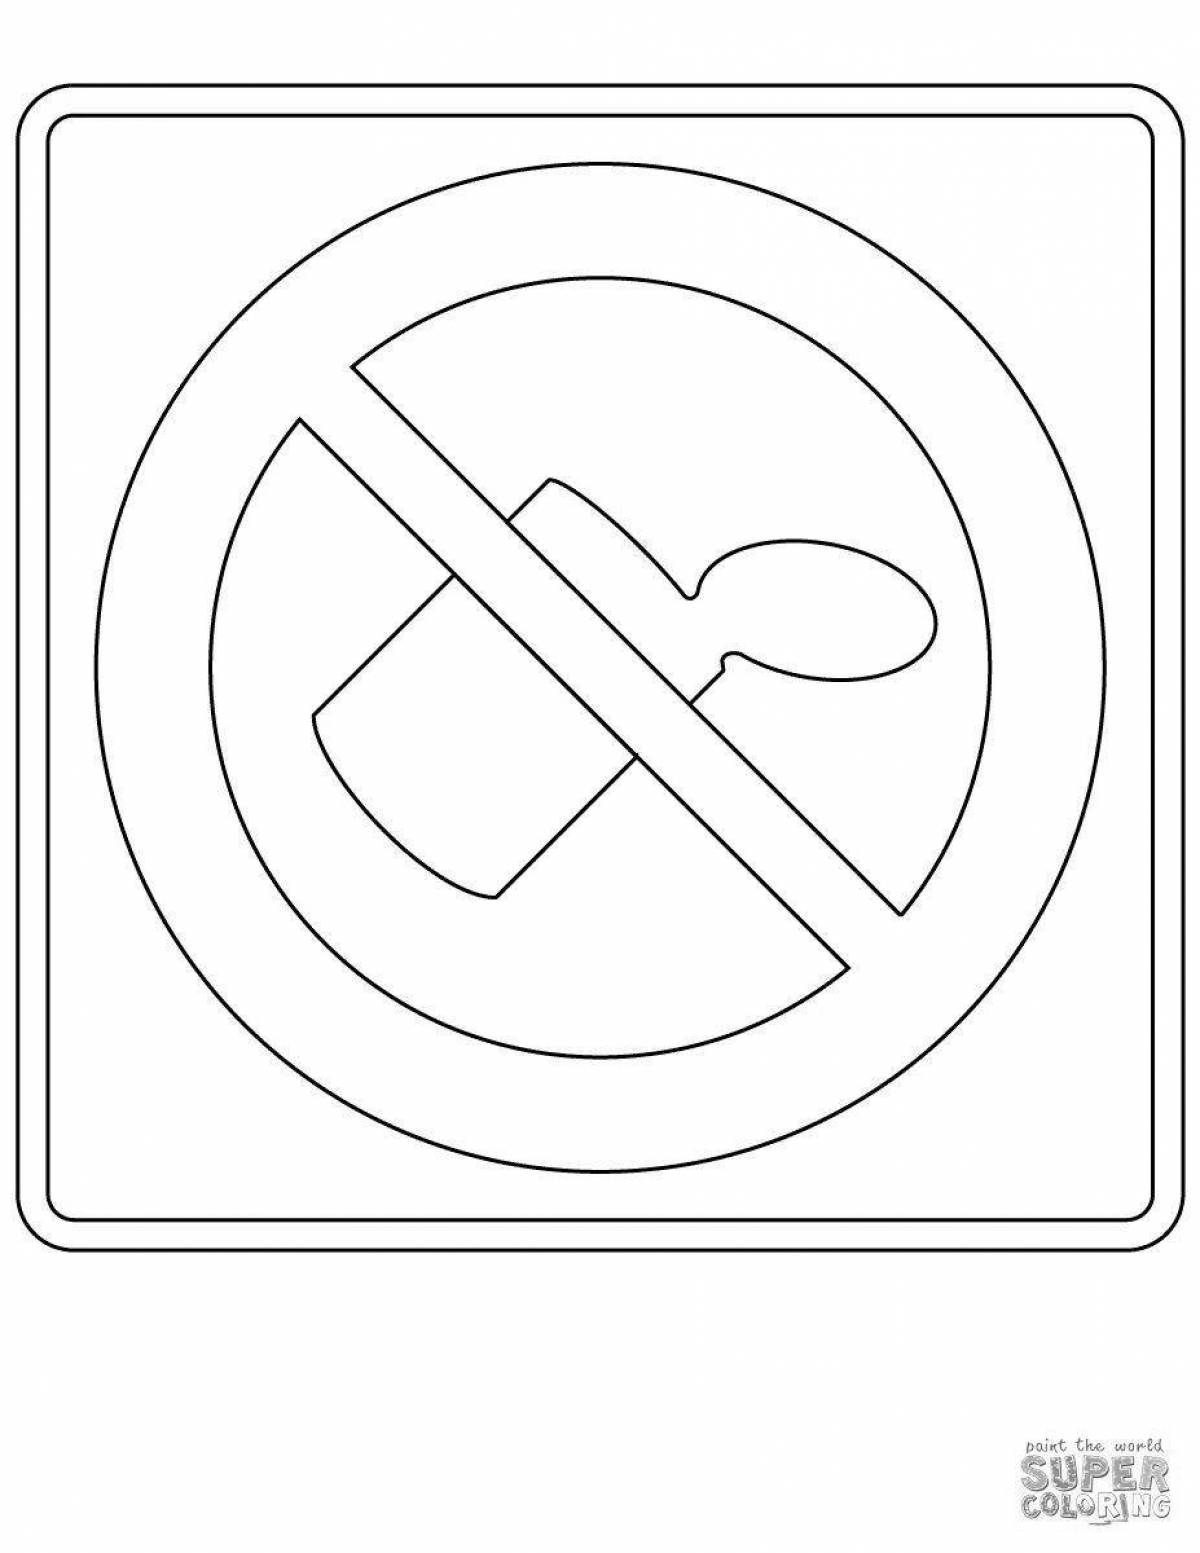 Fun coloring pages with eco signs for kids